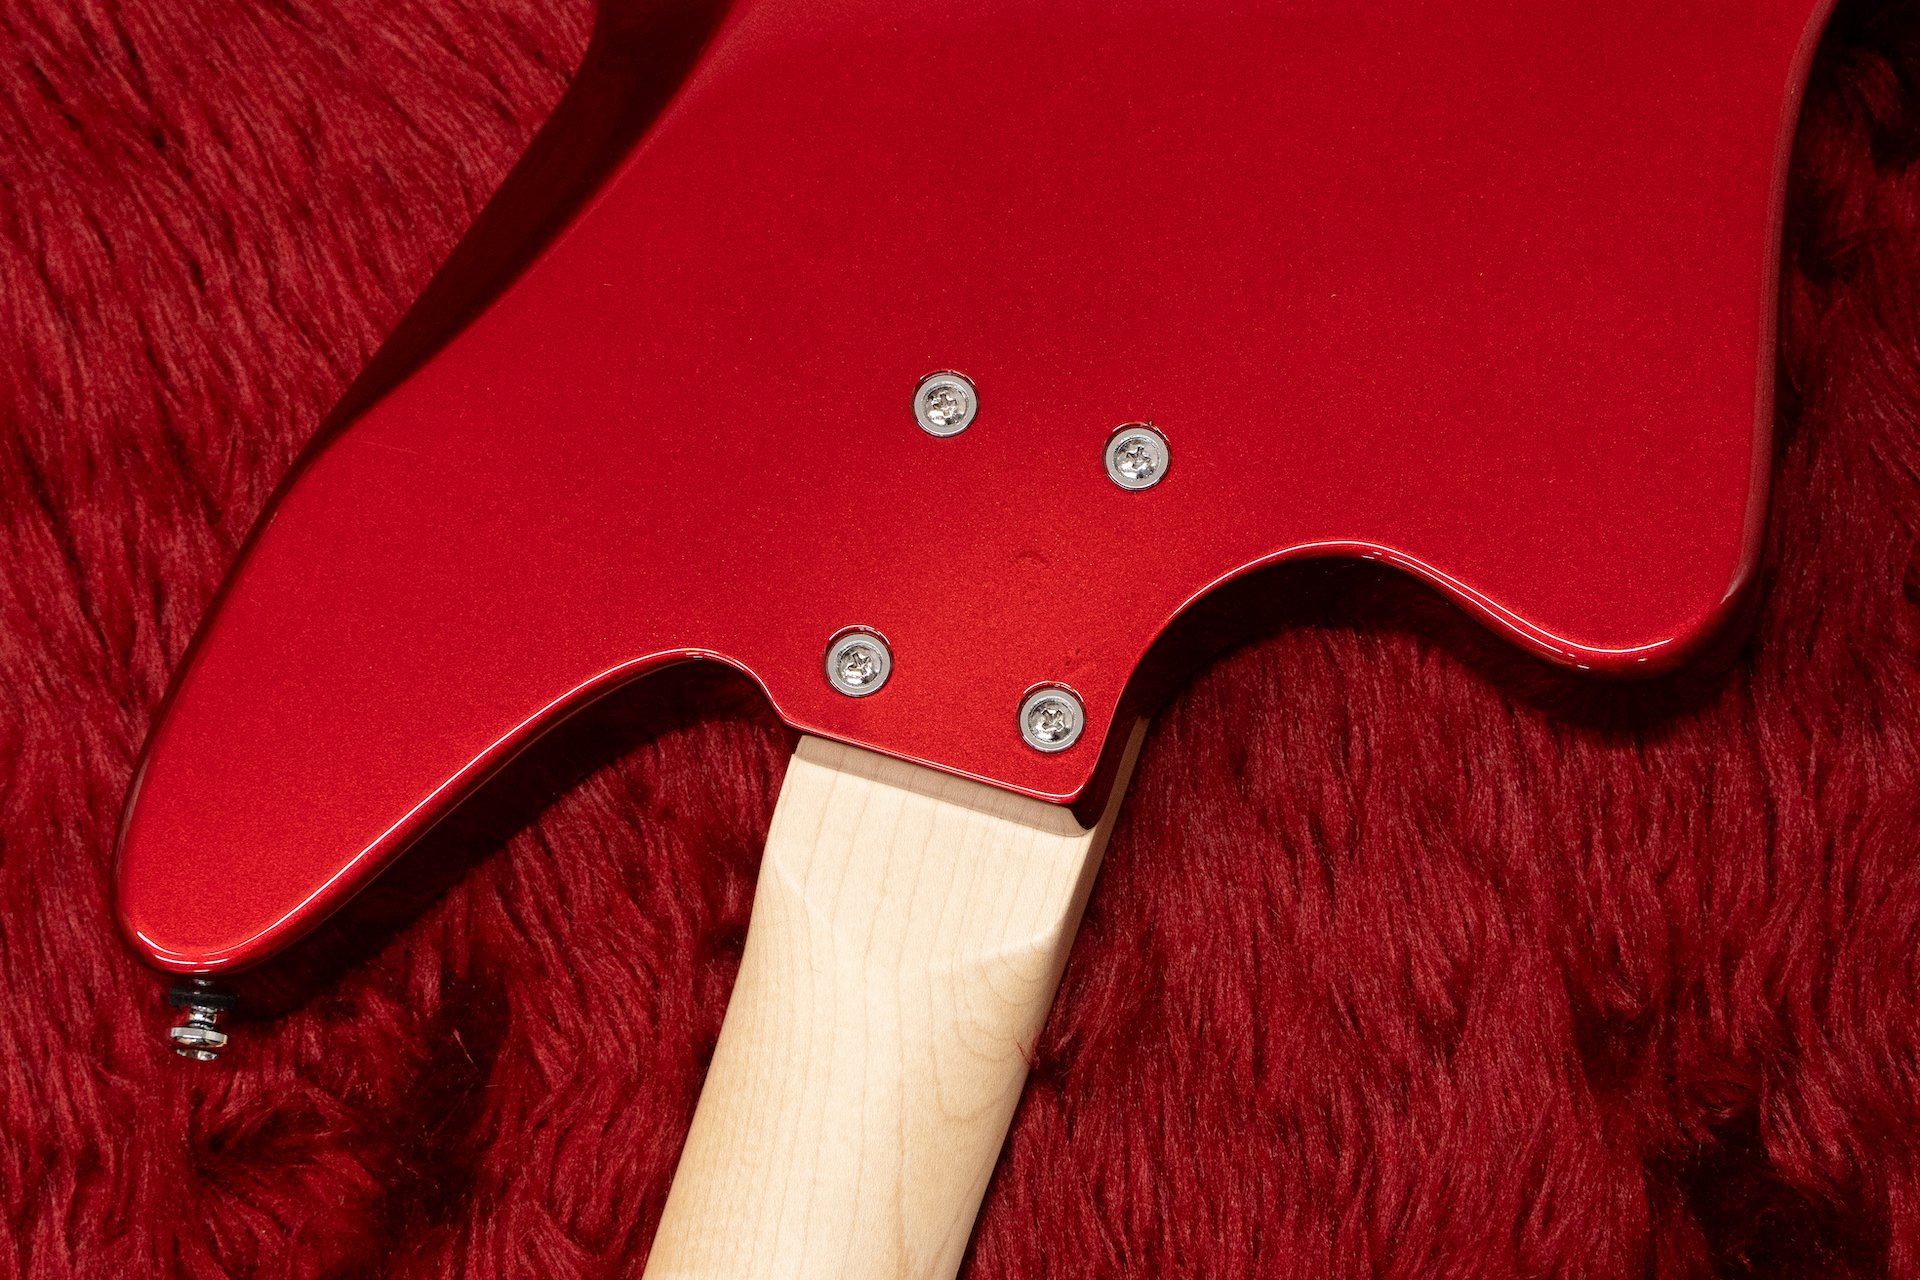 outlet】Ashdown / THE SAINT BASS Candy Apple Red #00045 4.025kg